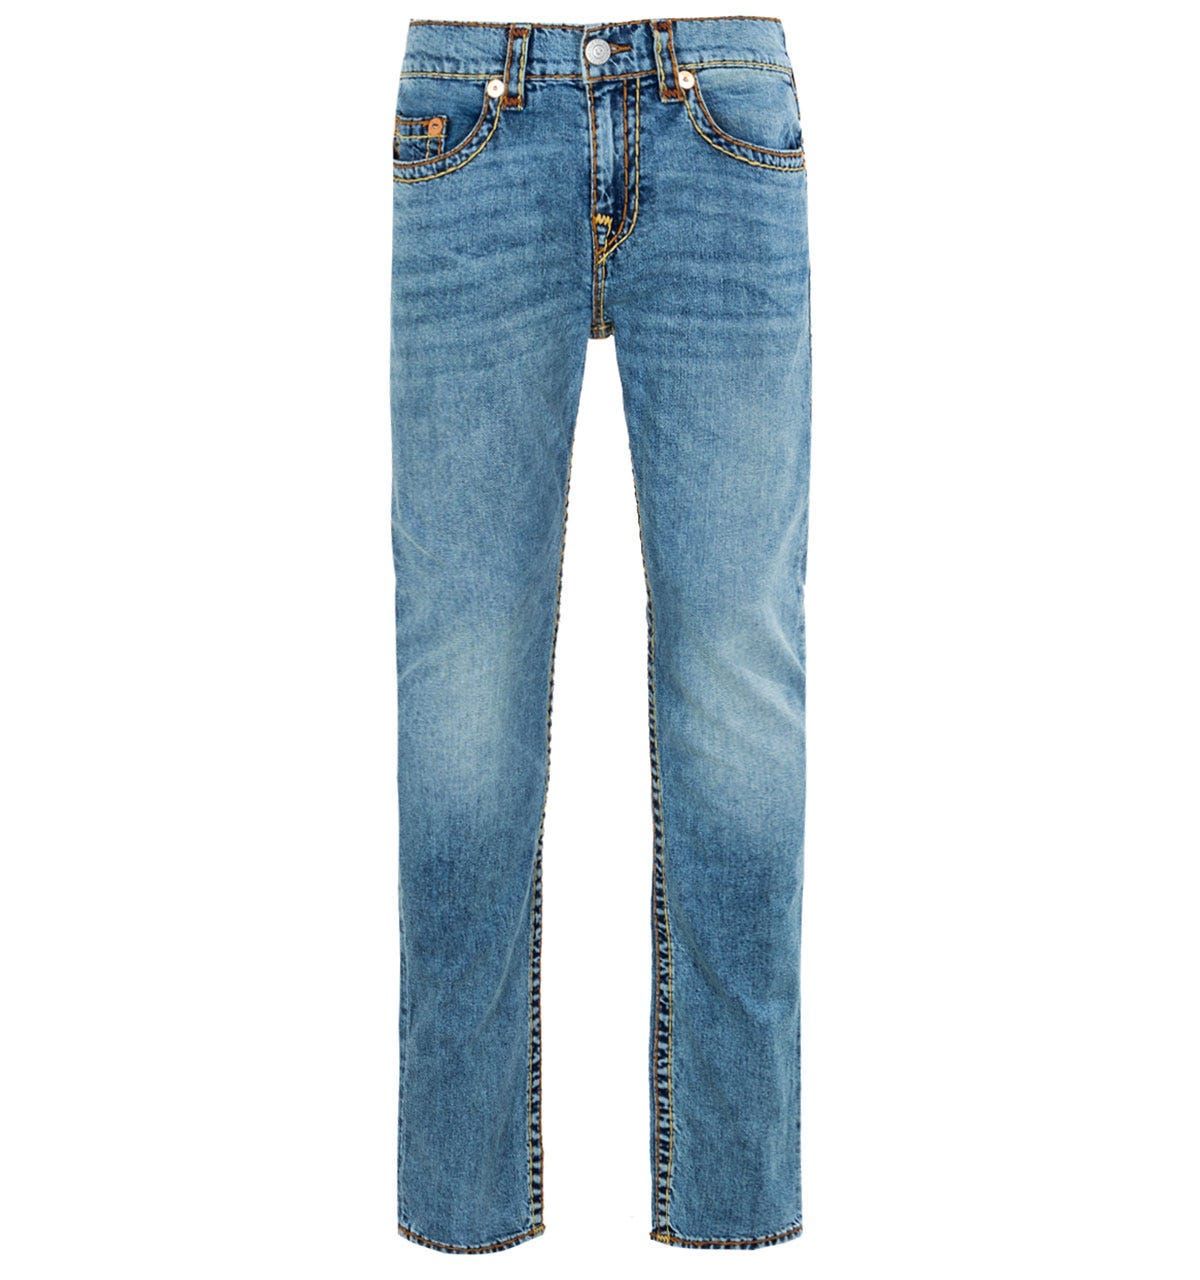 True Religion Rocco Super T Relaxed Skinny Jeans - Chopper Blue